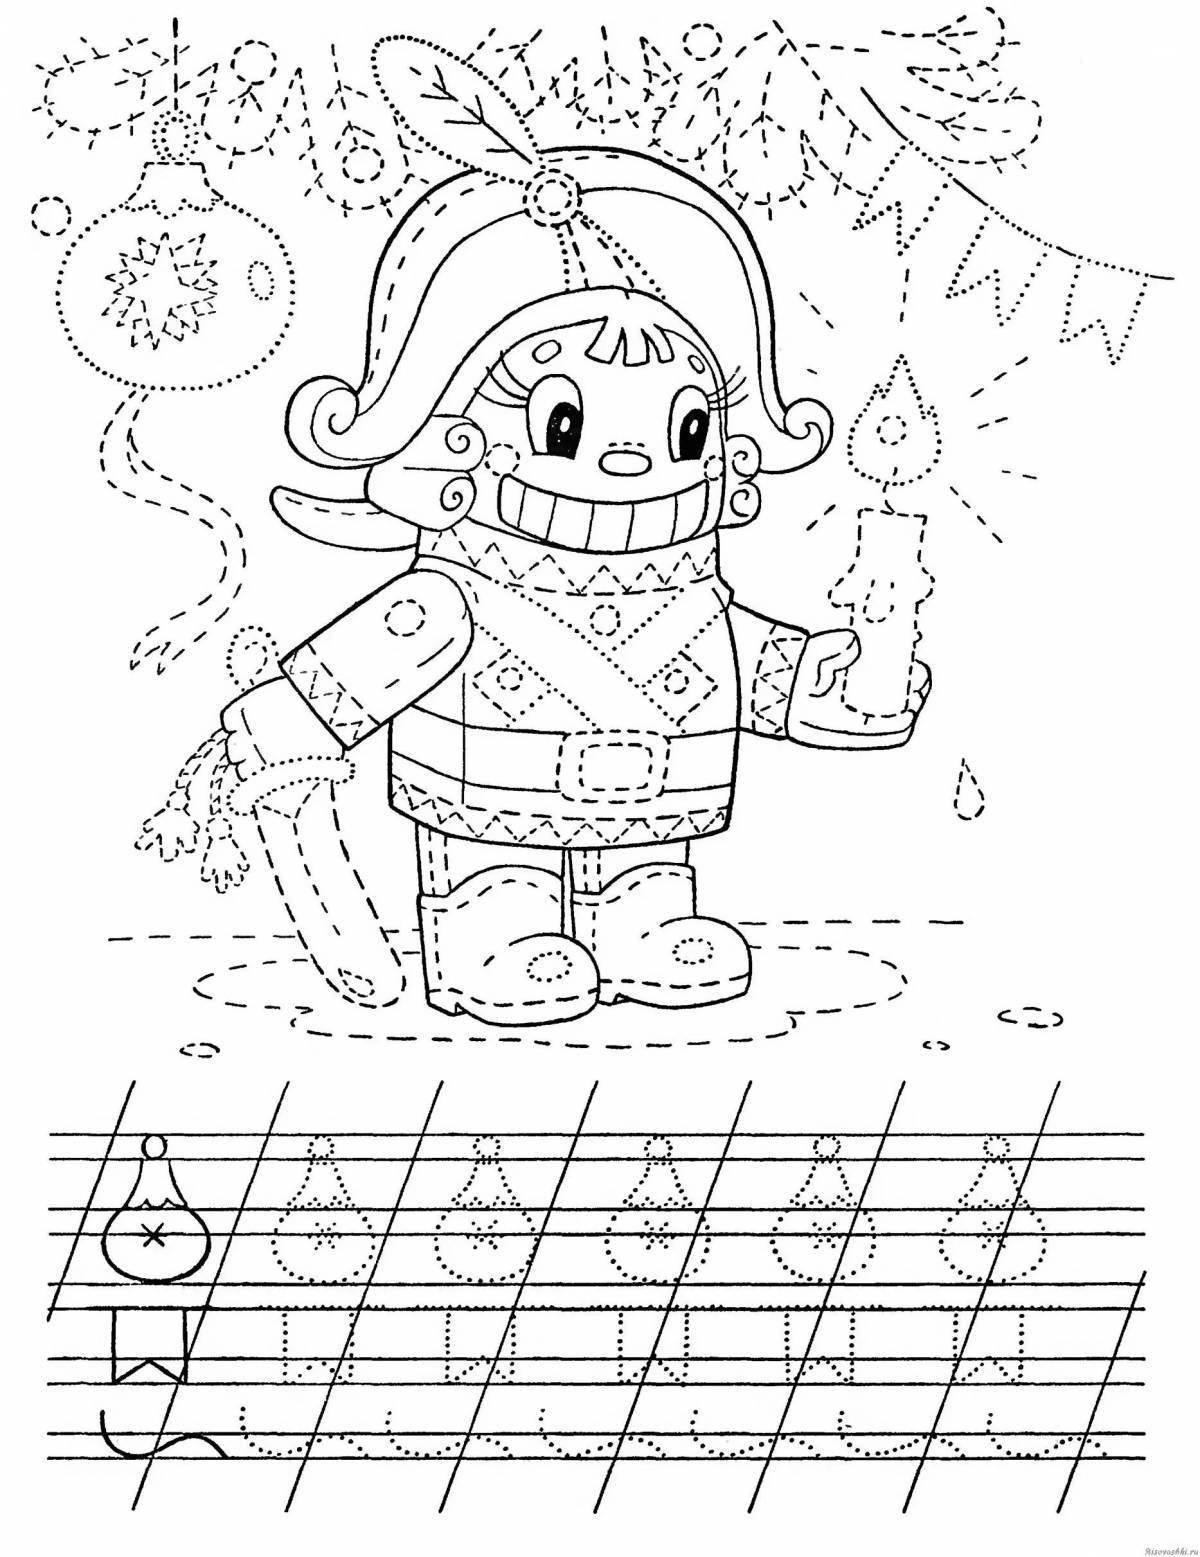 Coloring book charming nutcracker and mouse king